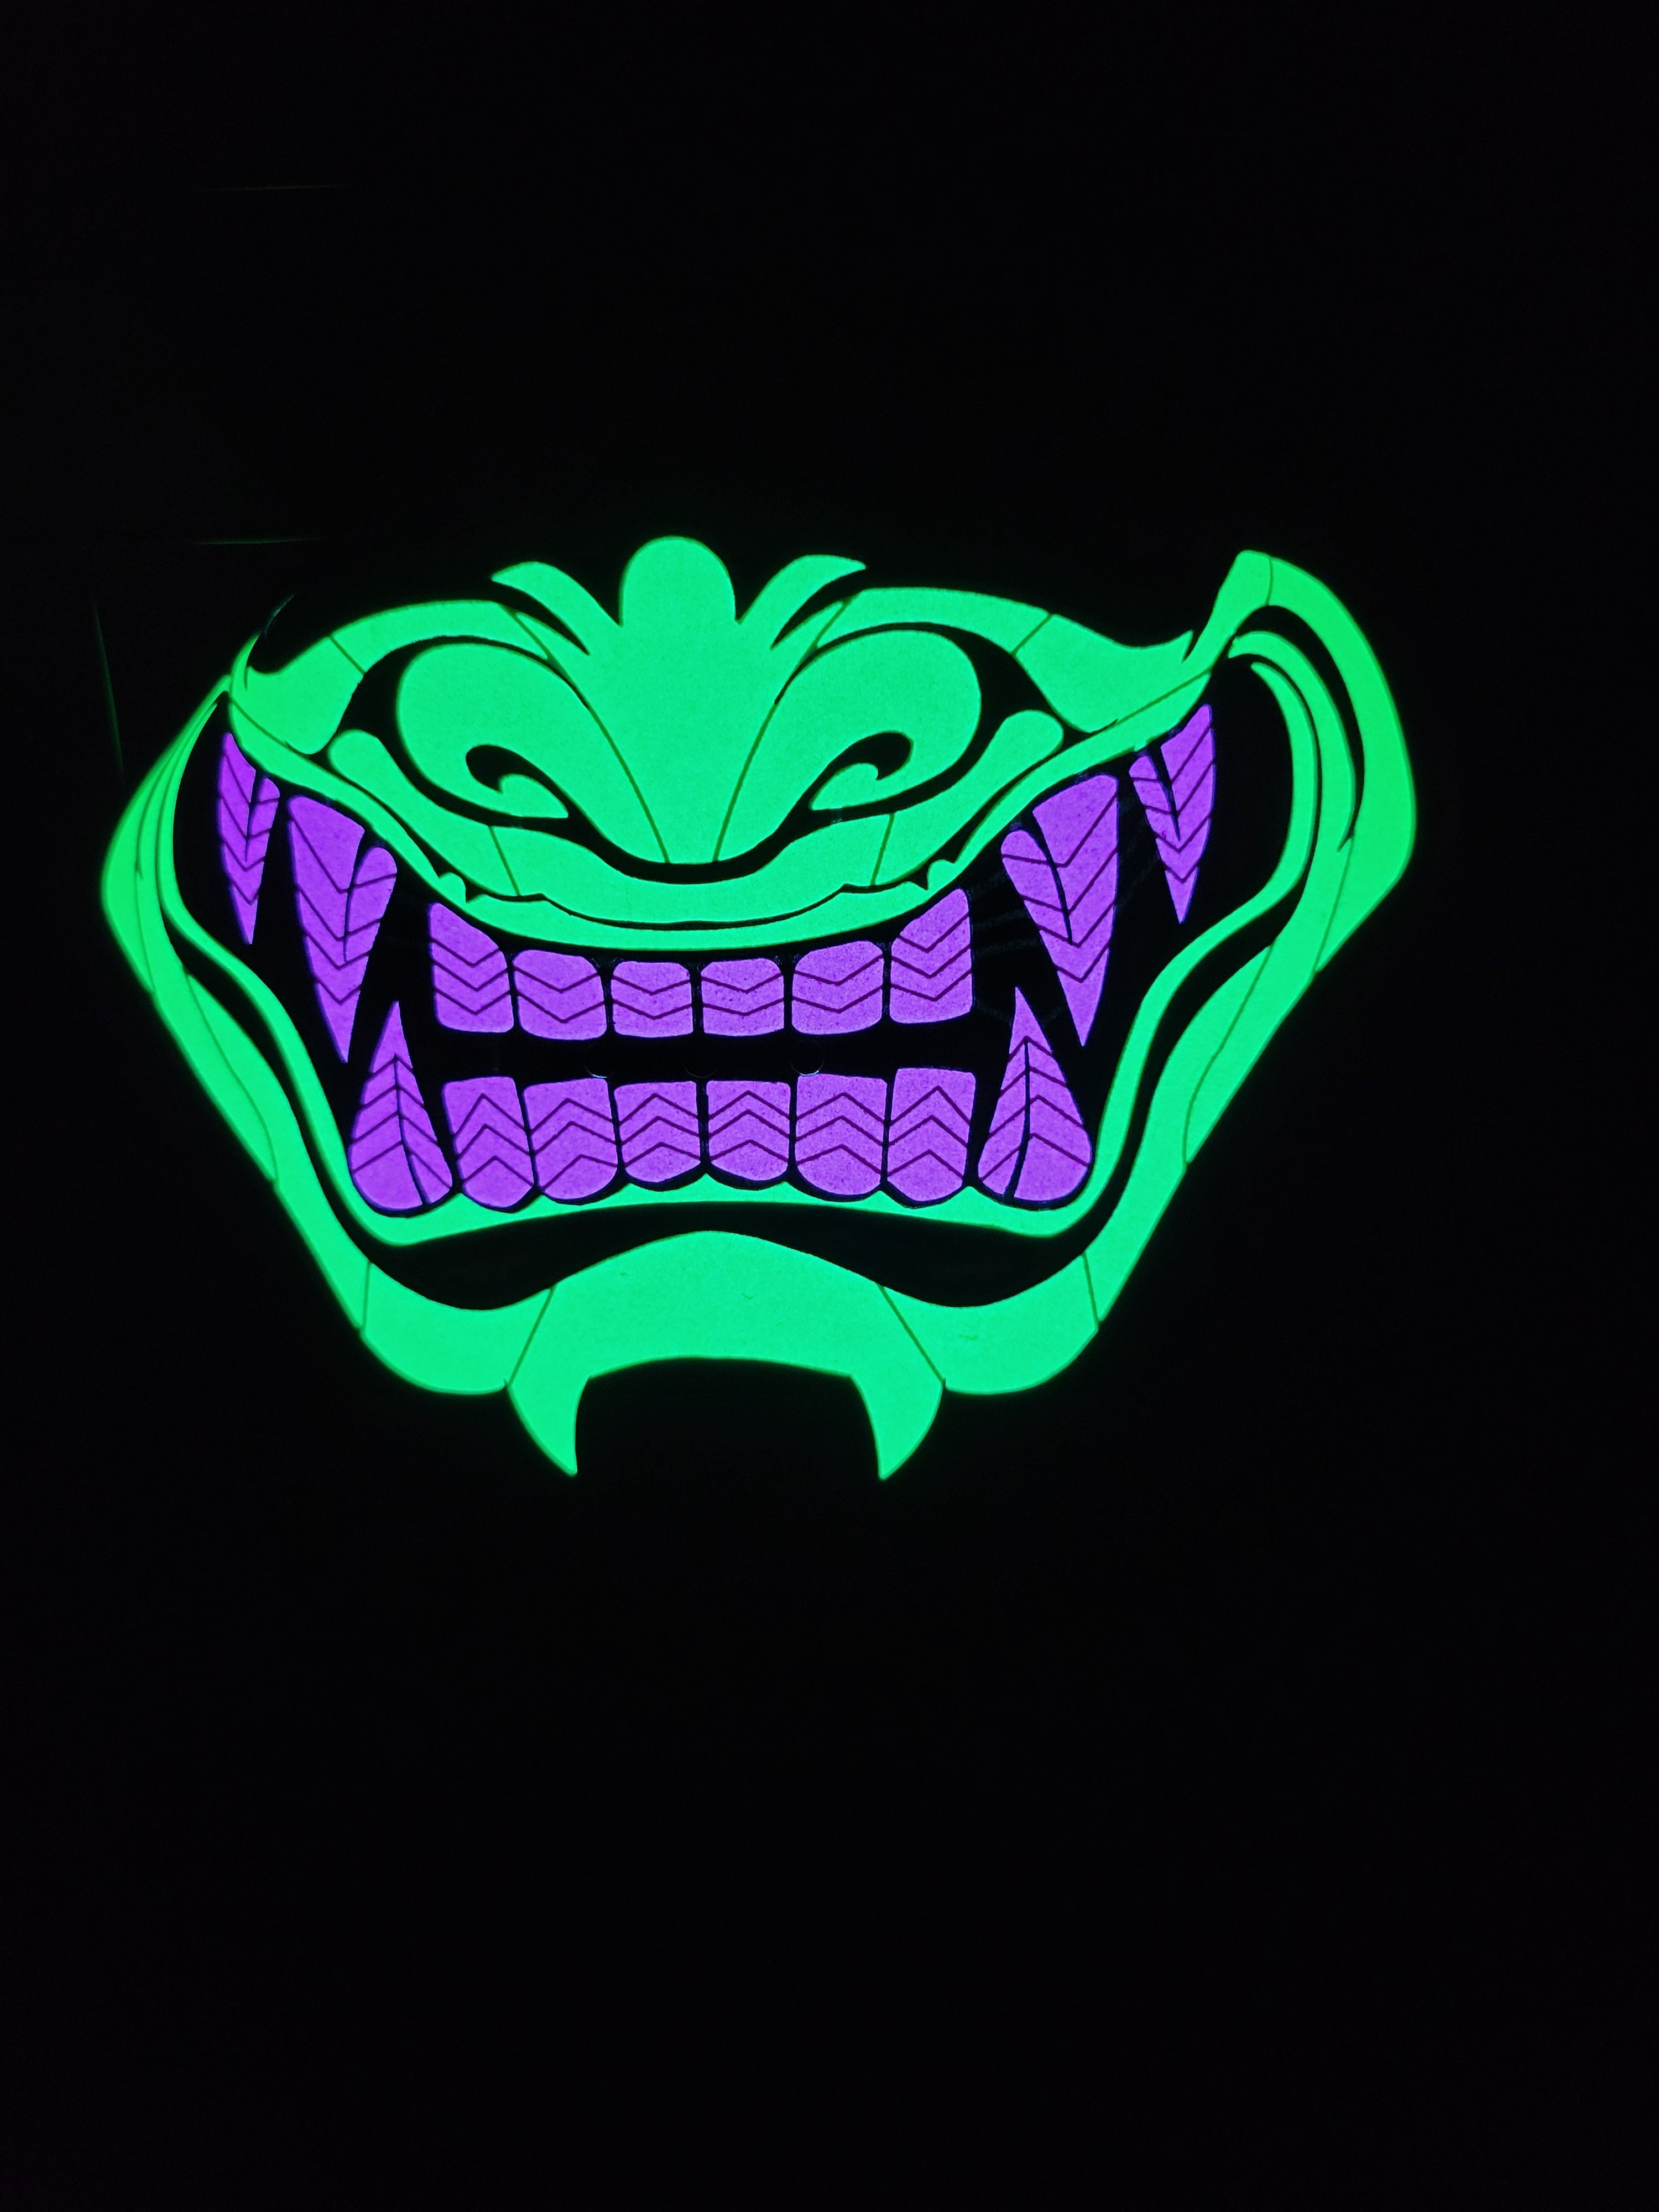 Sound activated green with purple oni mask